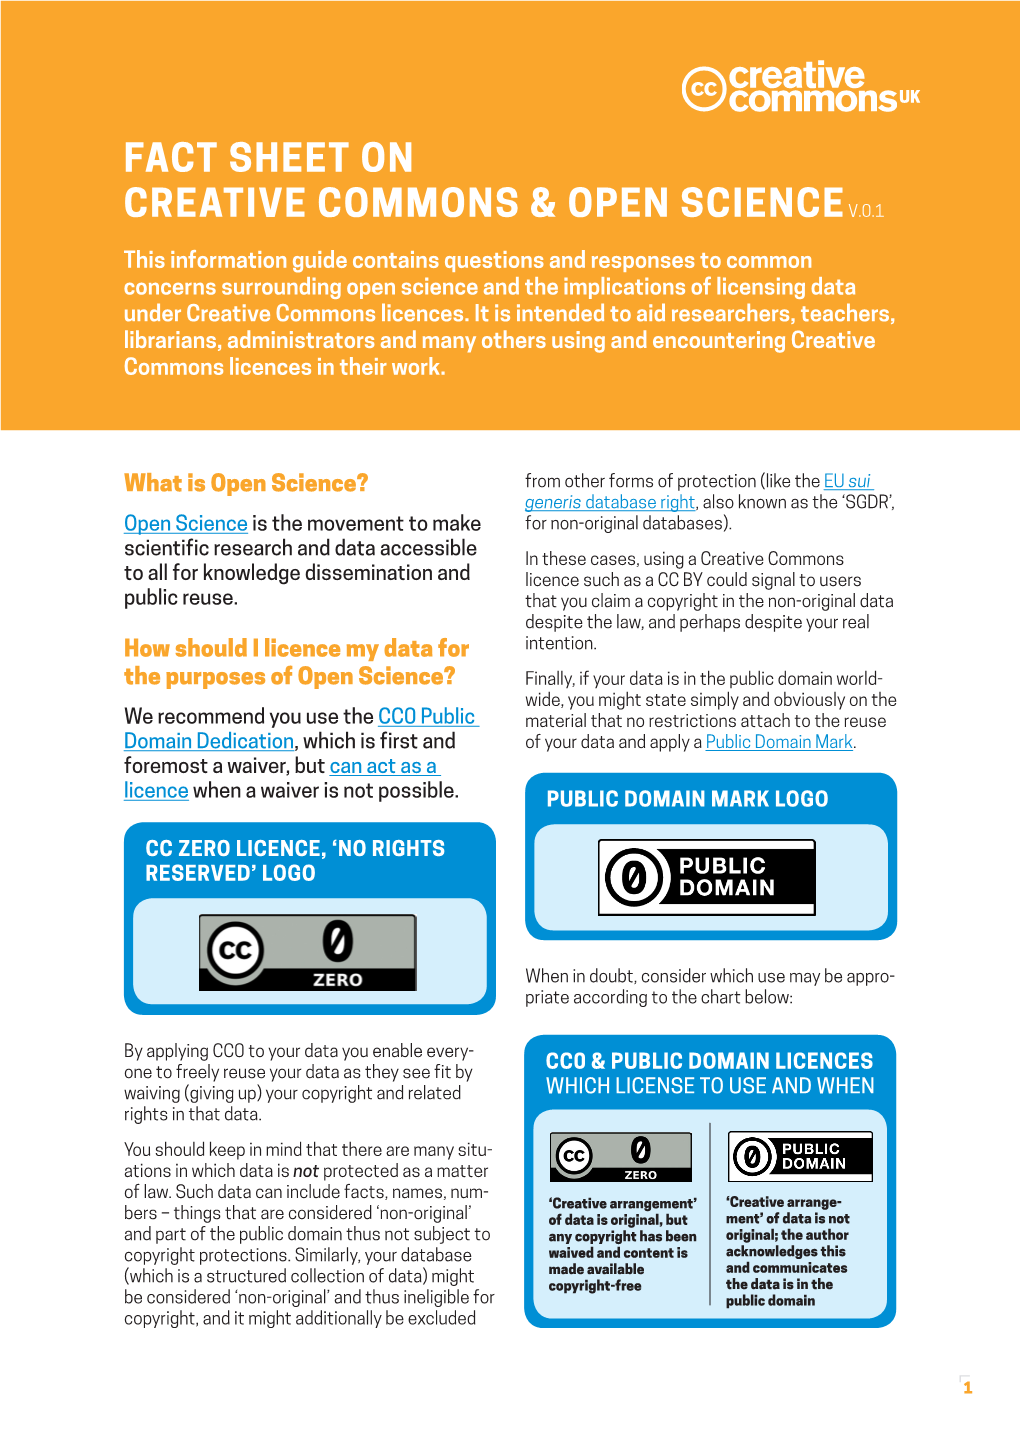 Fact Sheet on Creative Commons & Open Science